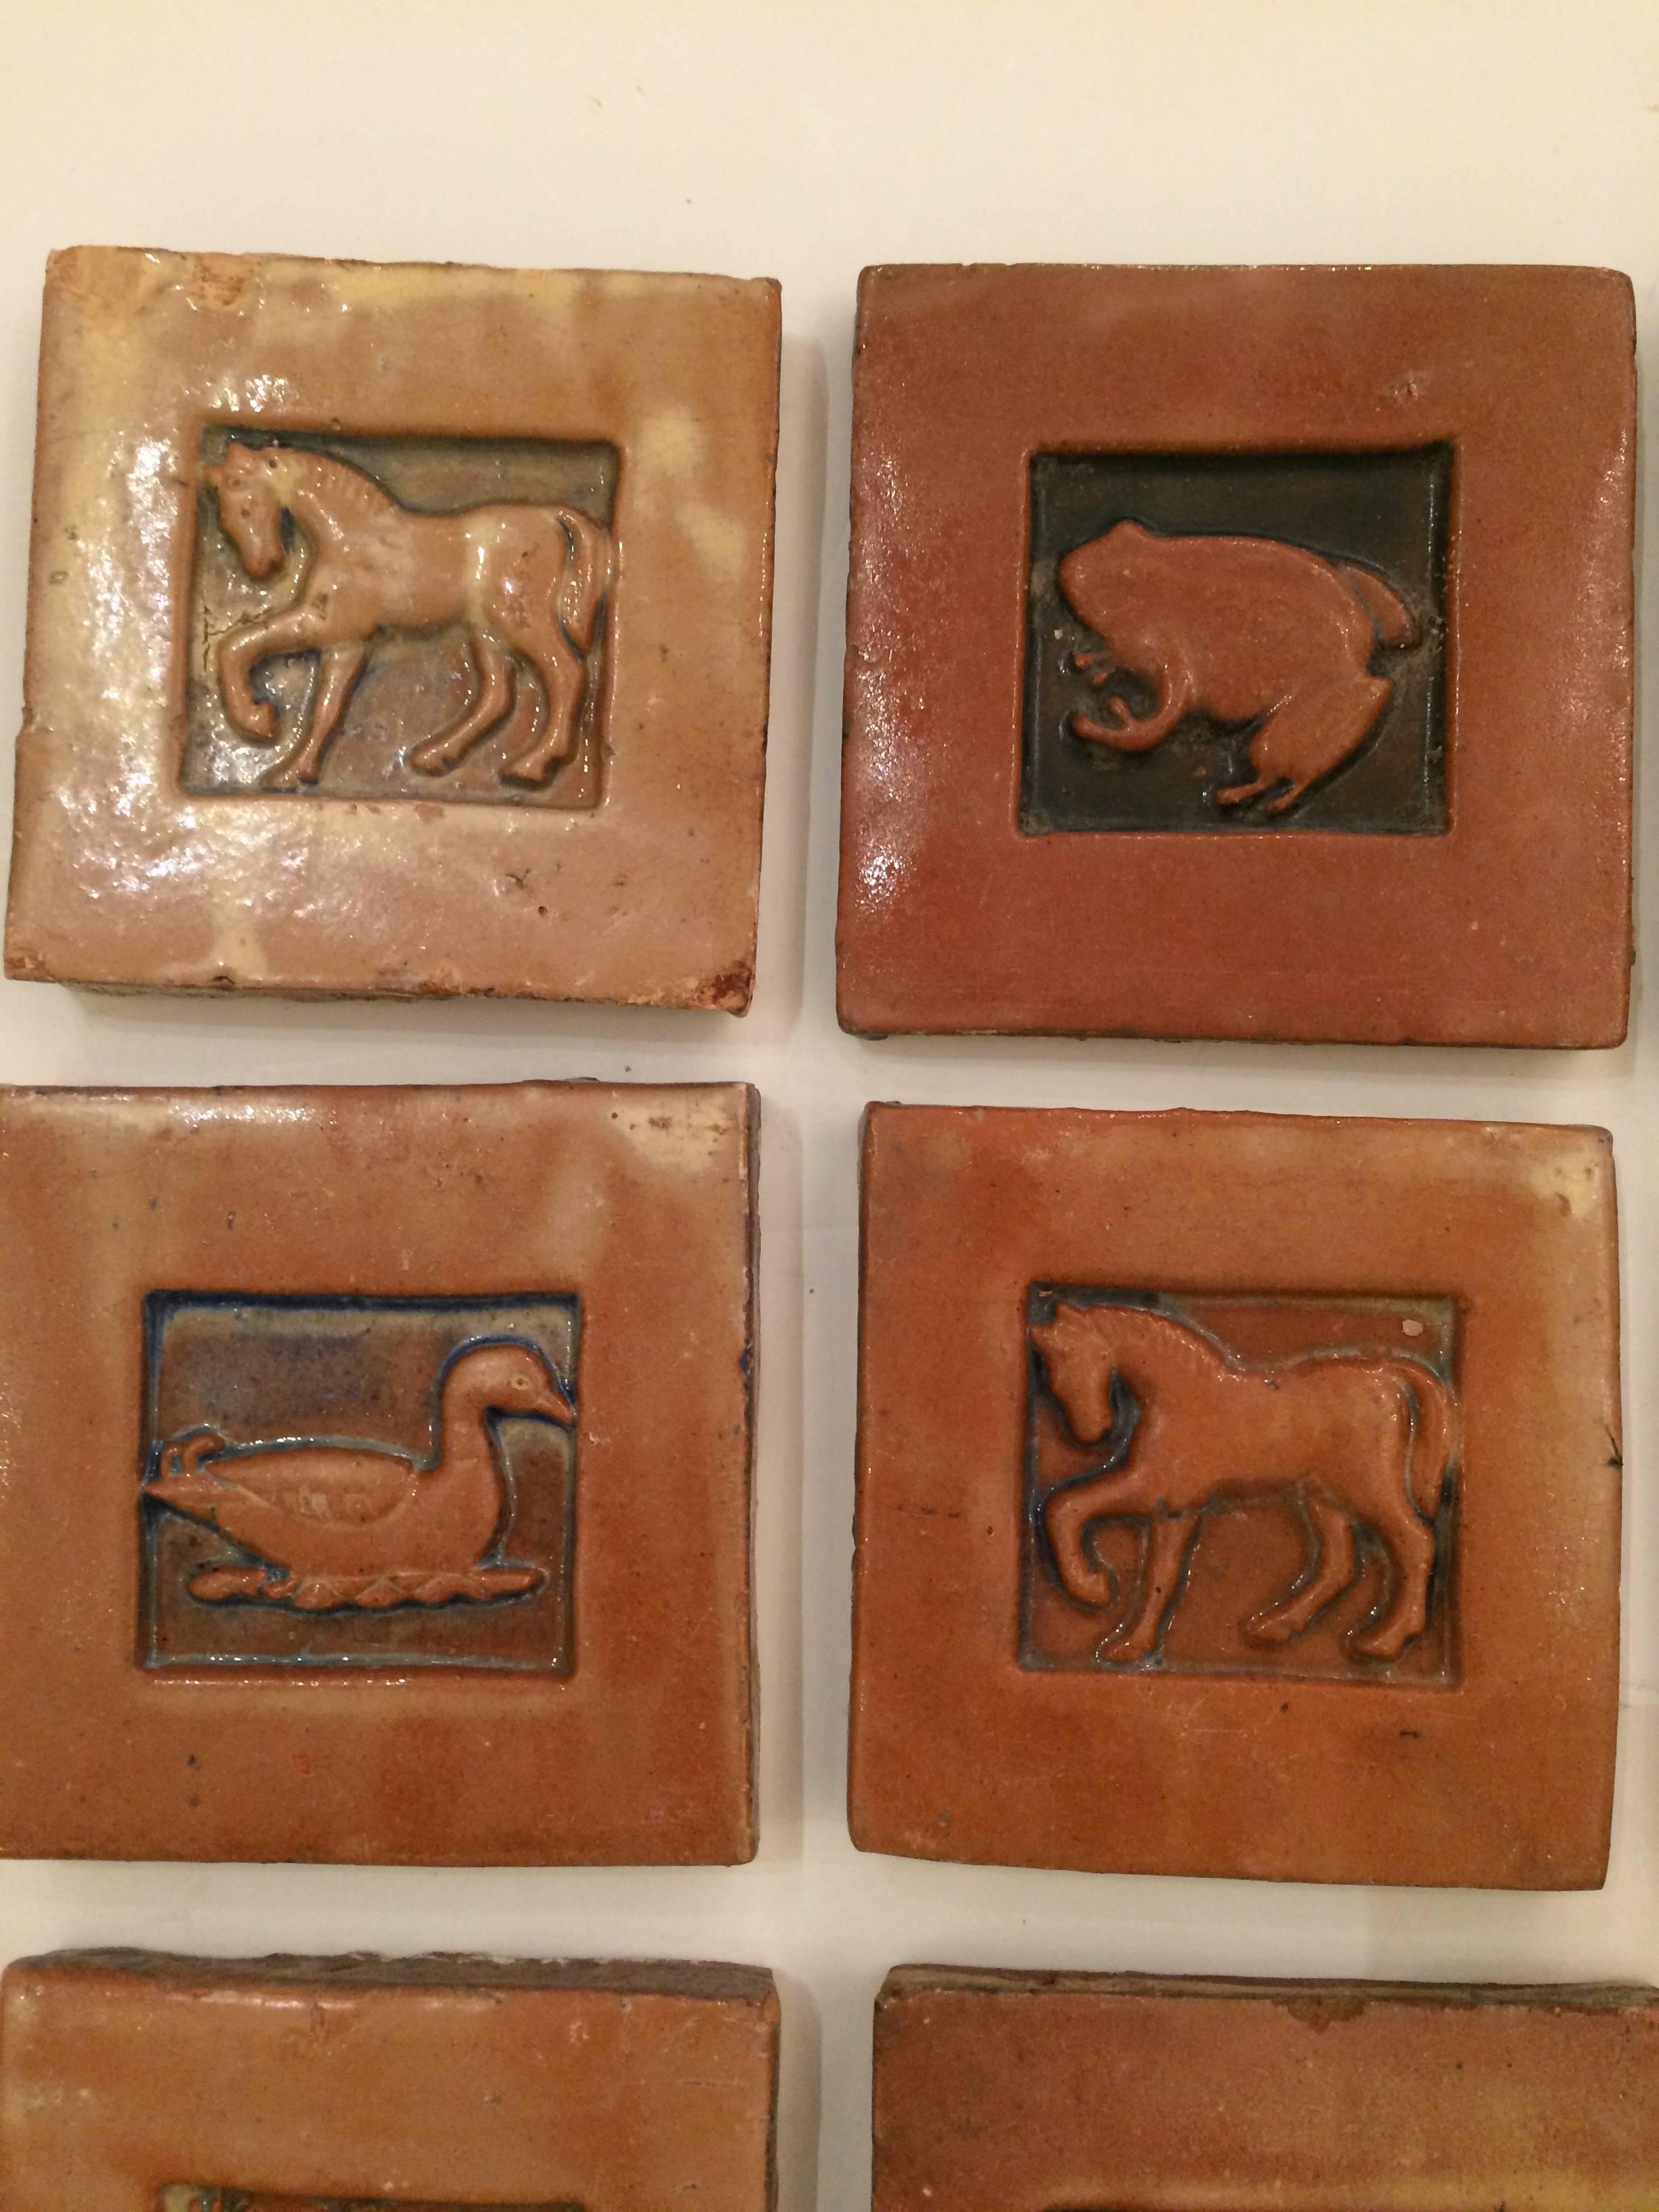 Beautiful handmade terracotta tiles with charming animals depicted in the centres, created at Moravian tile works in Bucks County about 20 years ago.